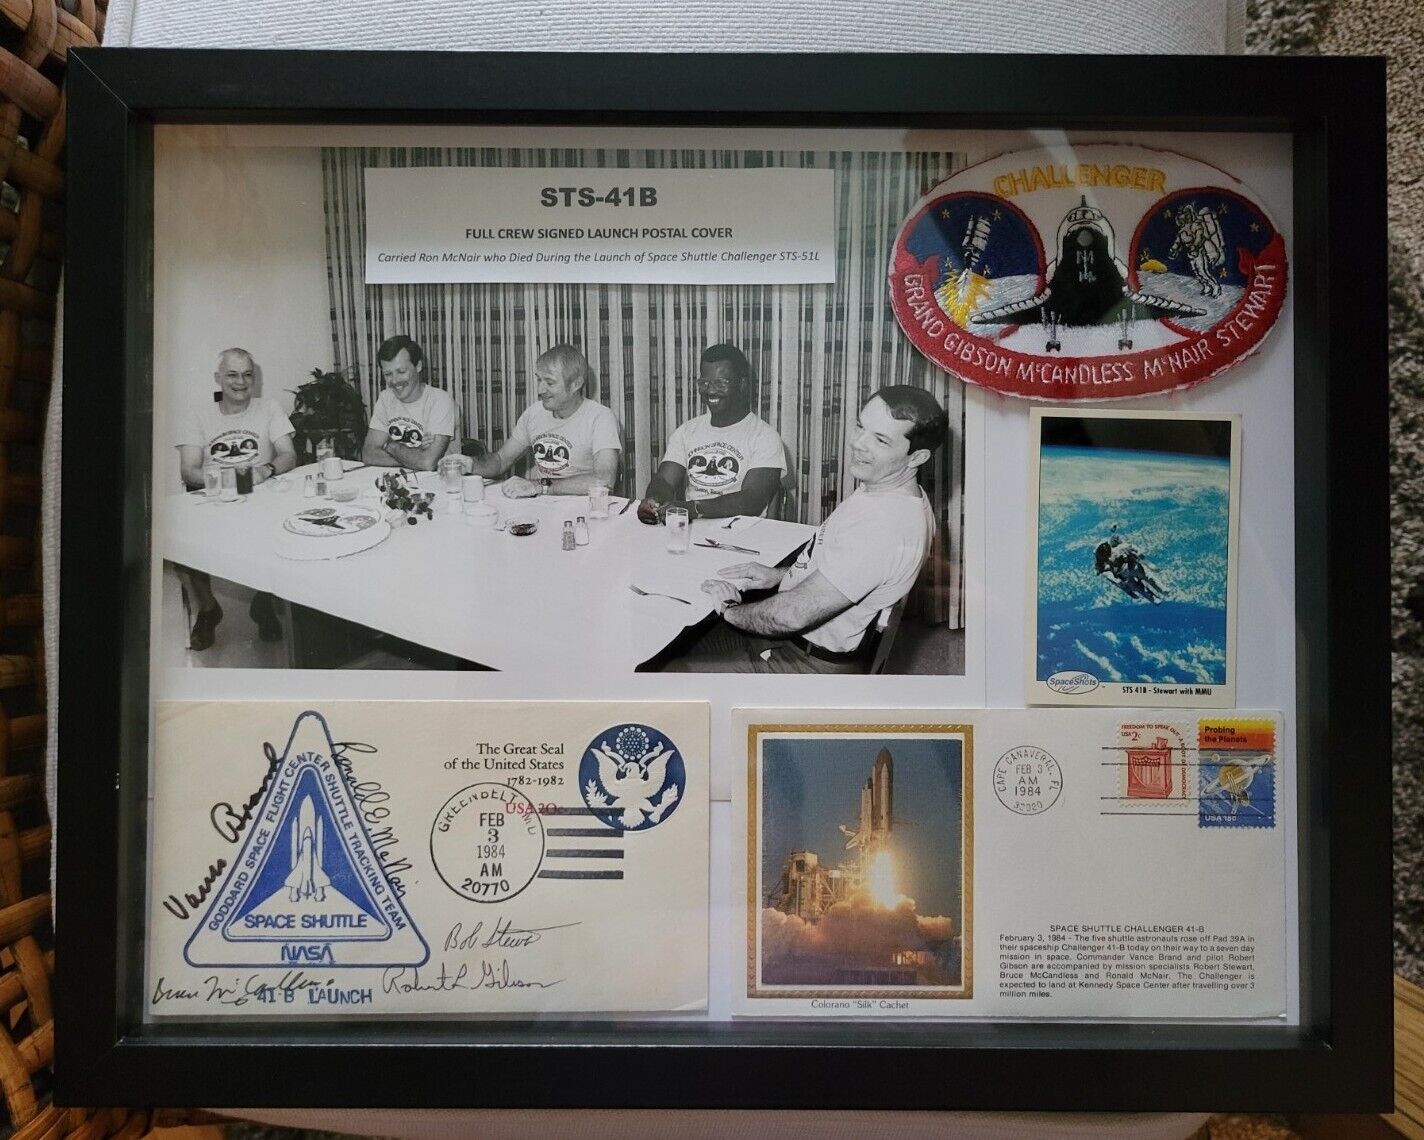 STS-41B Full Crew signed Launch Cover Display W ROB McNAIR BRUCE McCANDLESS CERT